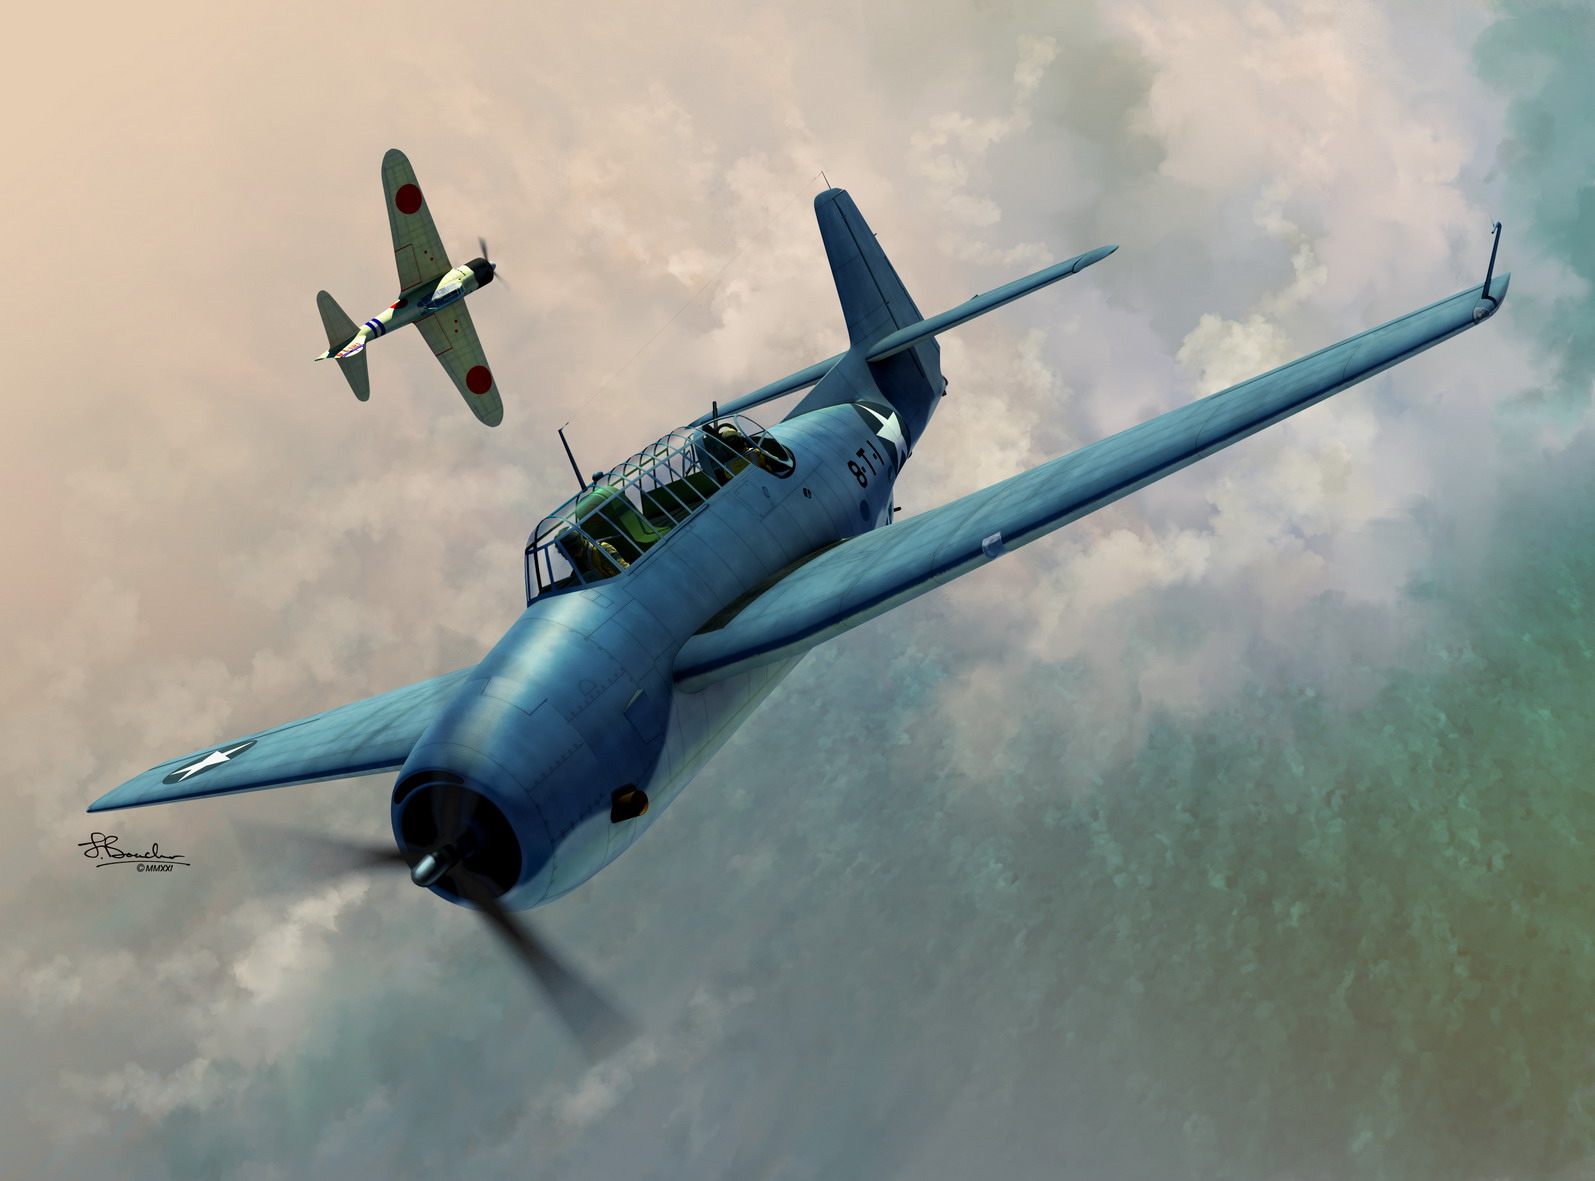 1/72 TBF-1 Avenger over Midway and Guadalcanal